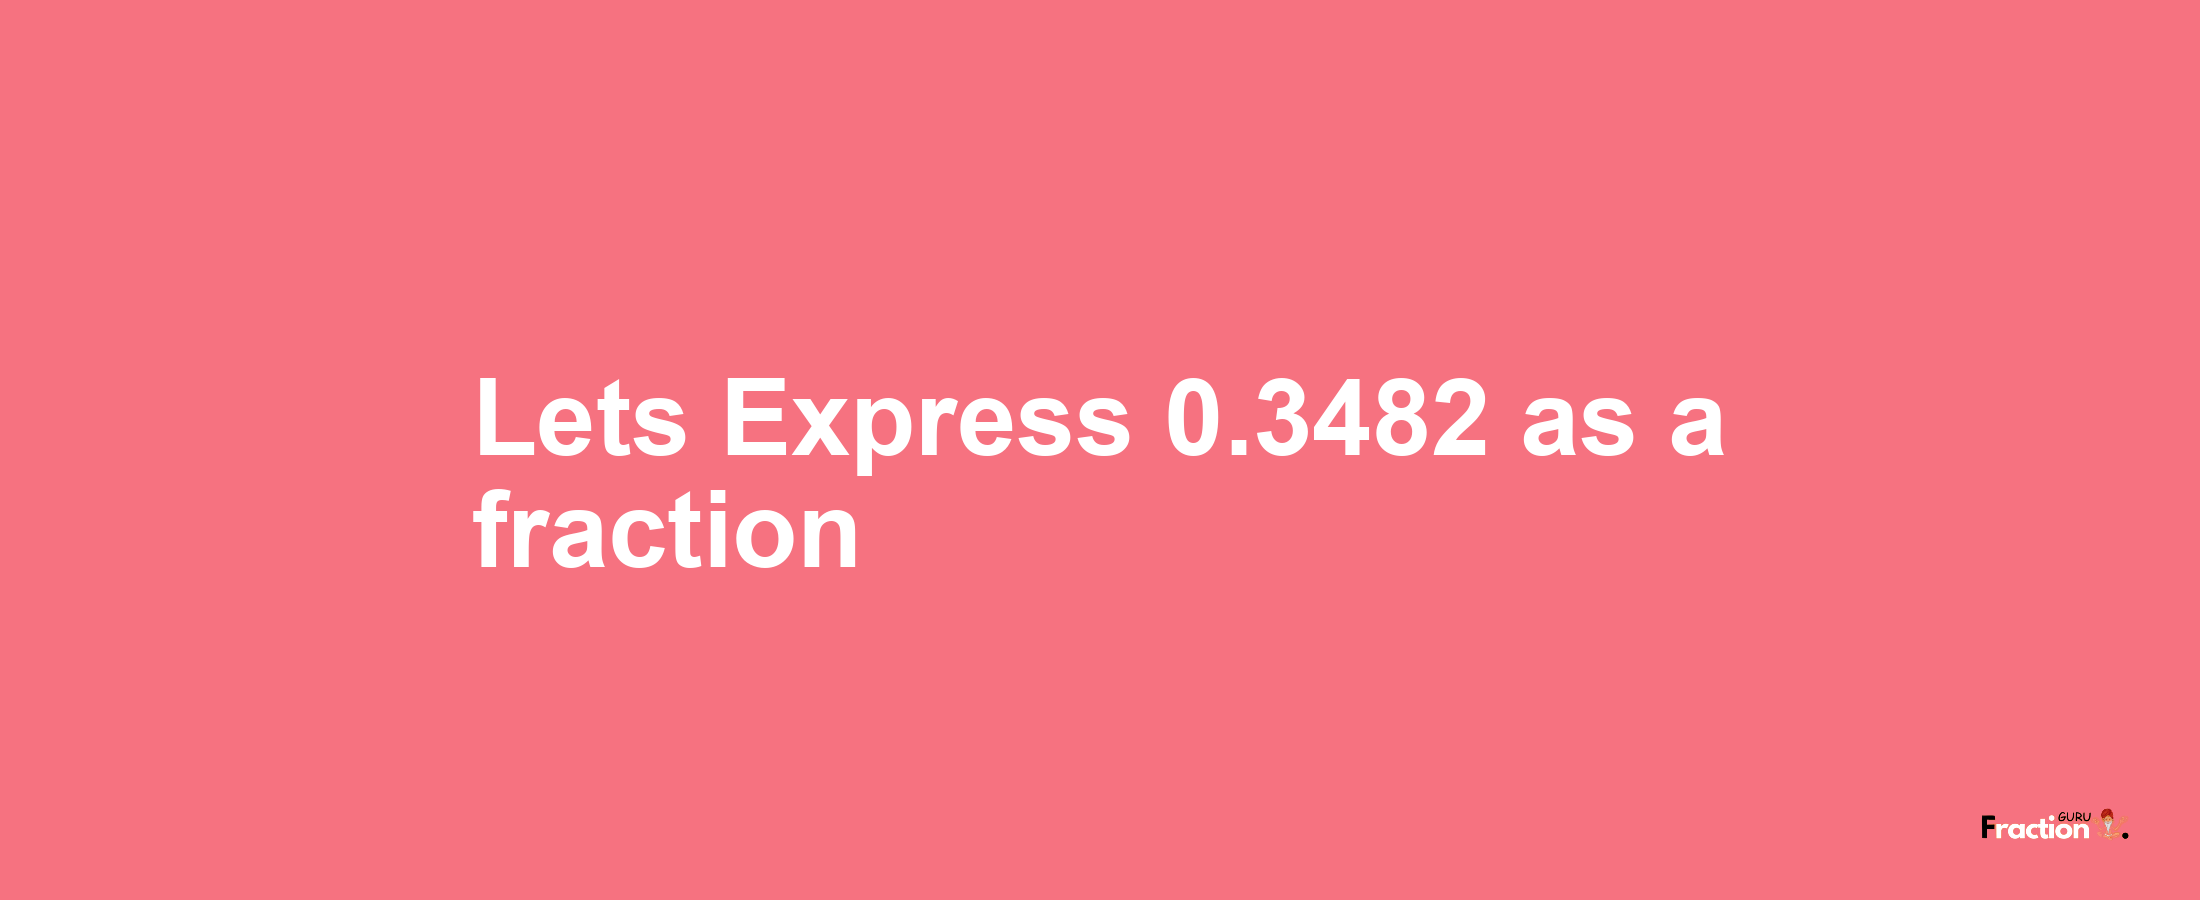 Lets Express 0.3482 as afraction